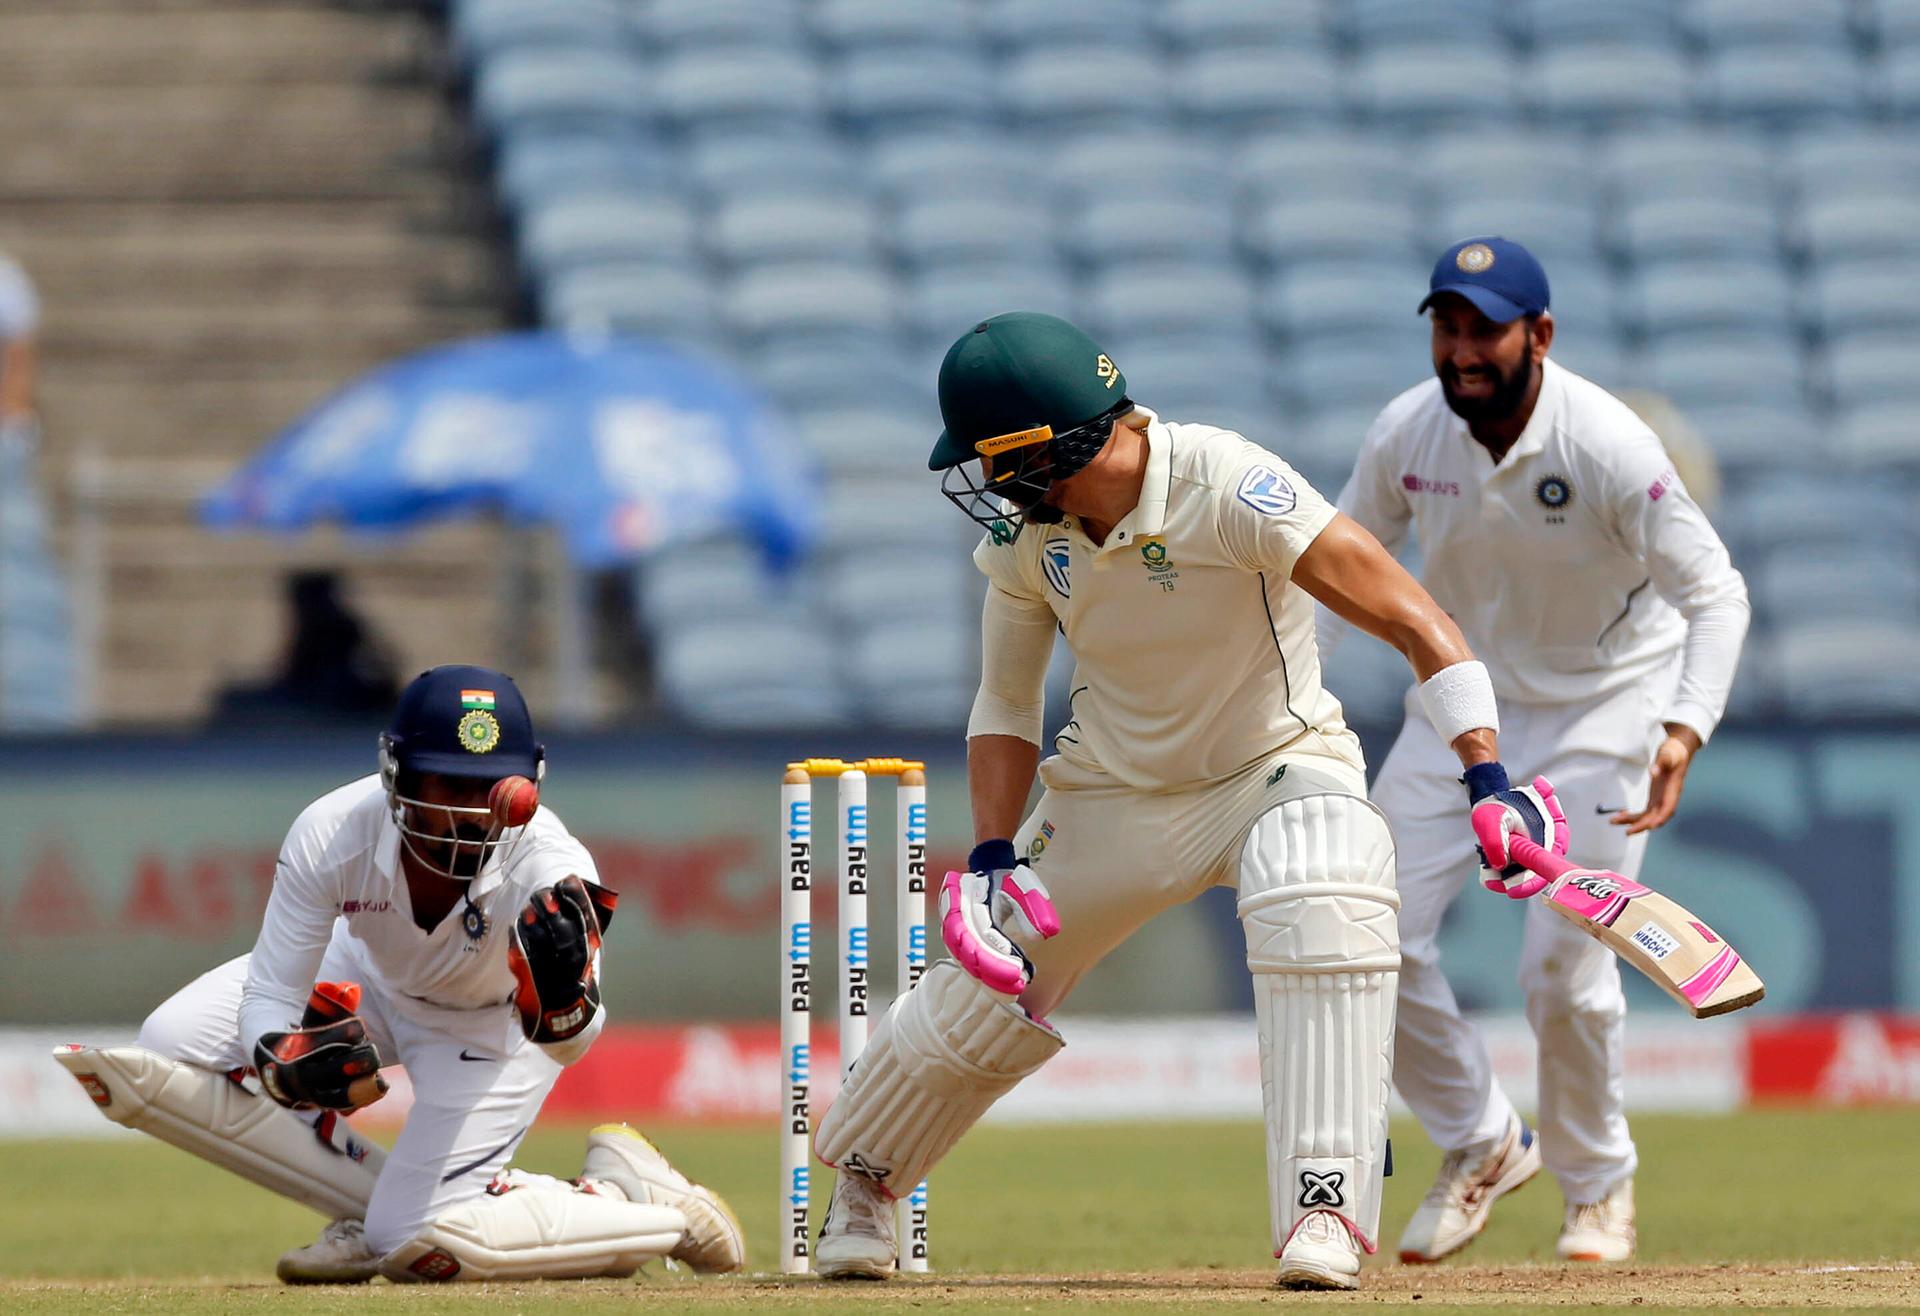 India's cricket team wicket keeper Wriddhiman Saha takes a catch of Faf du Plessis during fourth day of second cricket test match between India and South Africa in Pune, India, Sunday, Oct. 13, 2019. (AP Photo/Rajanish Kakade)